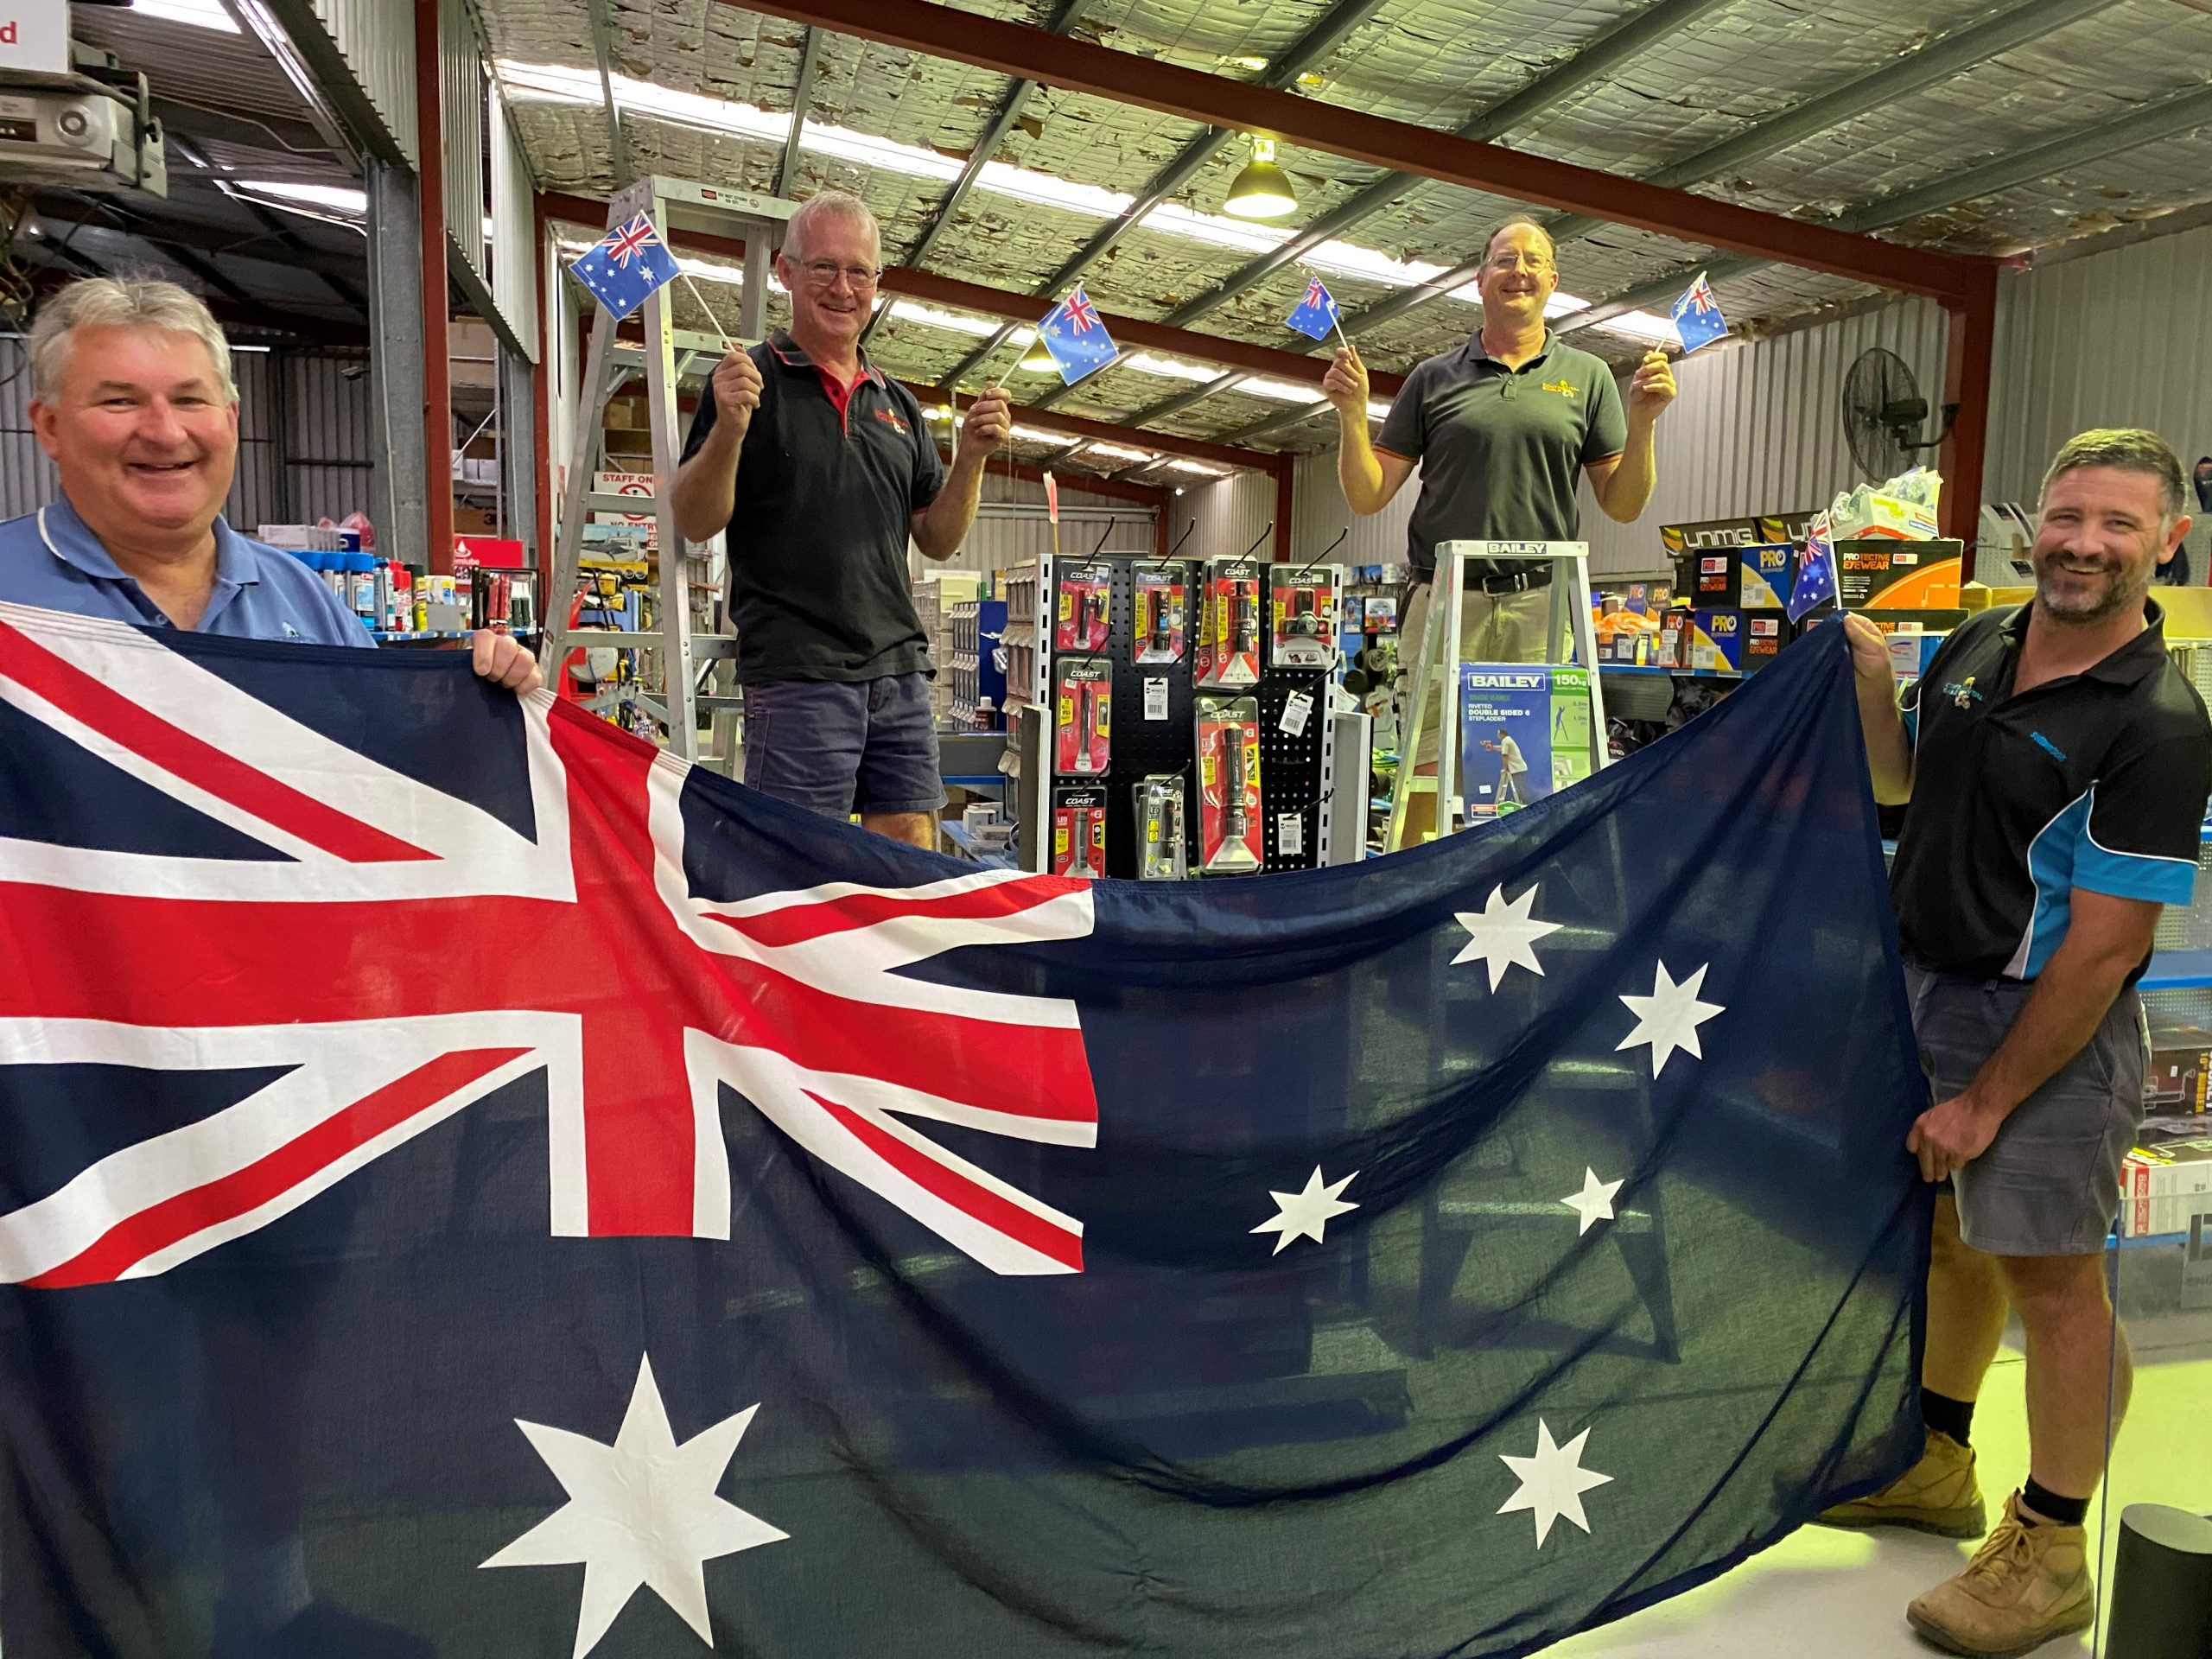 We can still fly the flag on Anzac Day